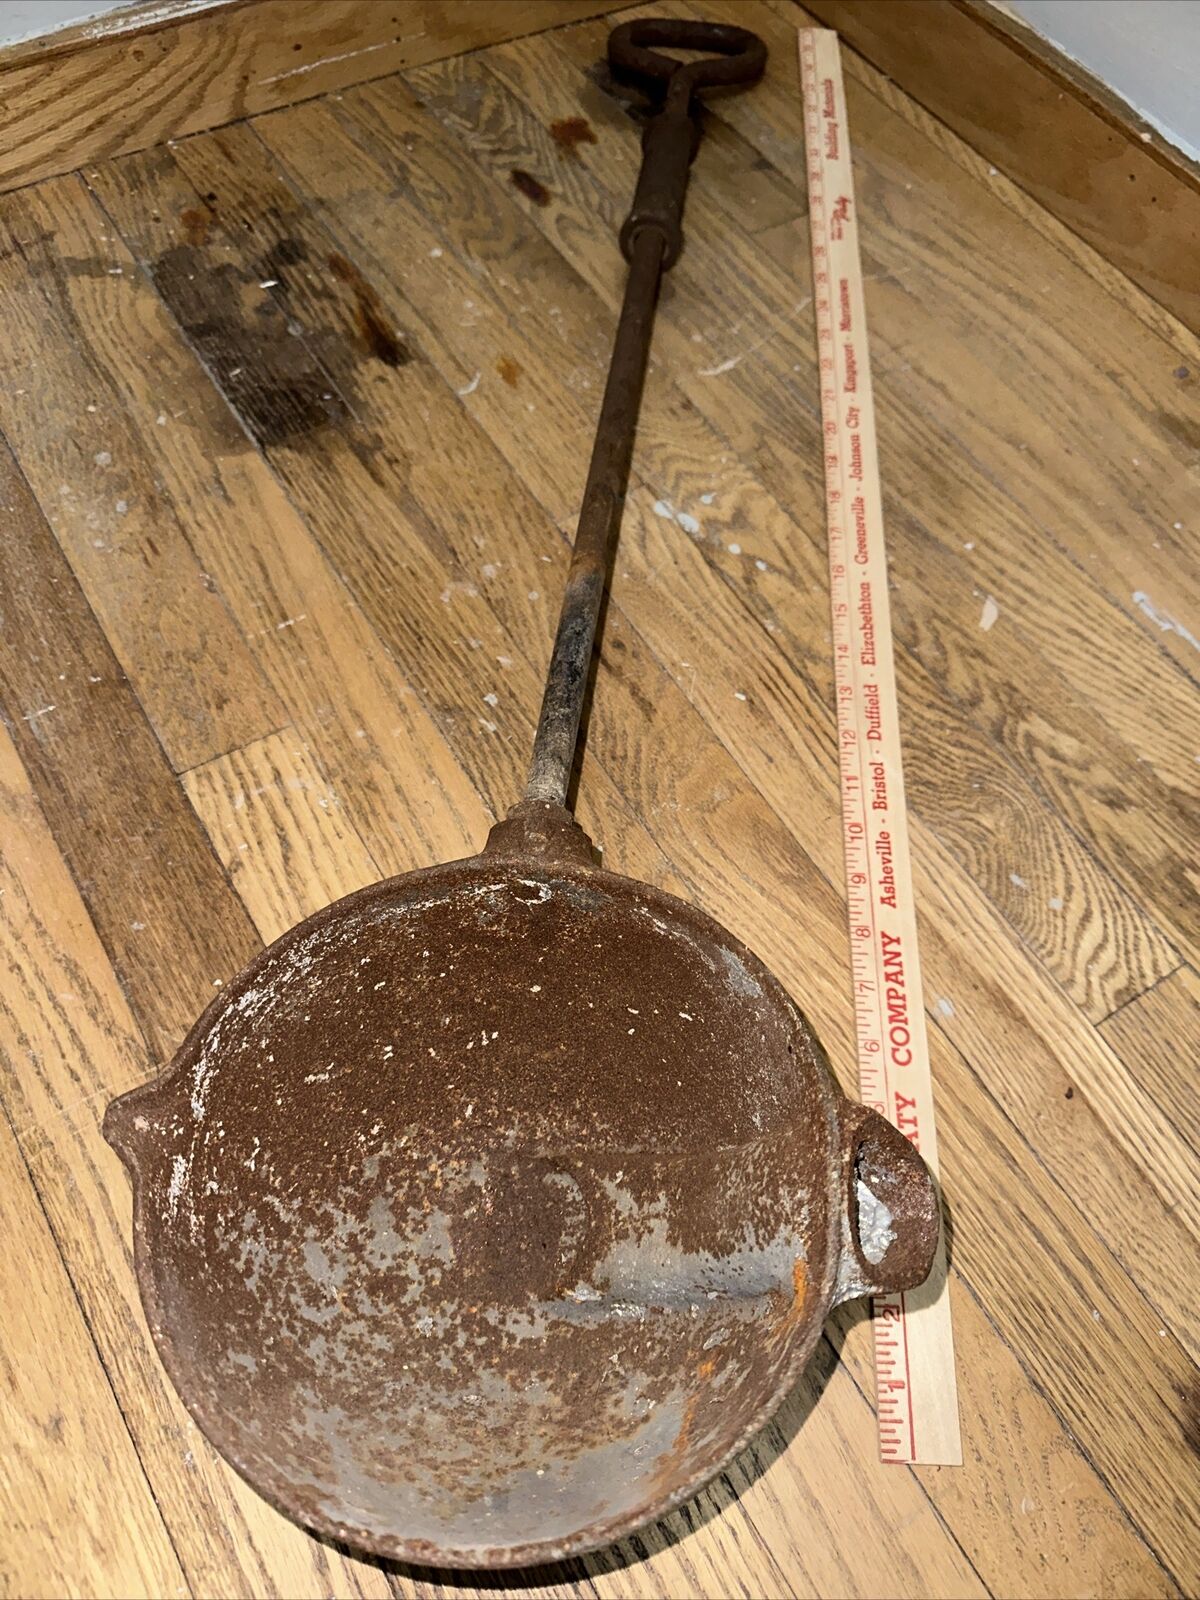 Huge Antique Rusty Metal Double Spout Smelting Ladle 37” Tall 1919 Rowell Mfg.